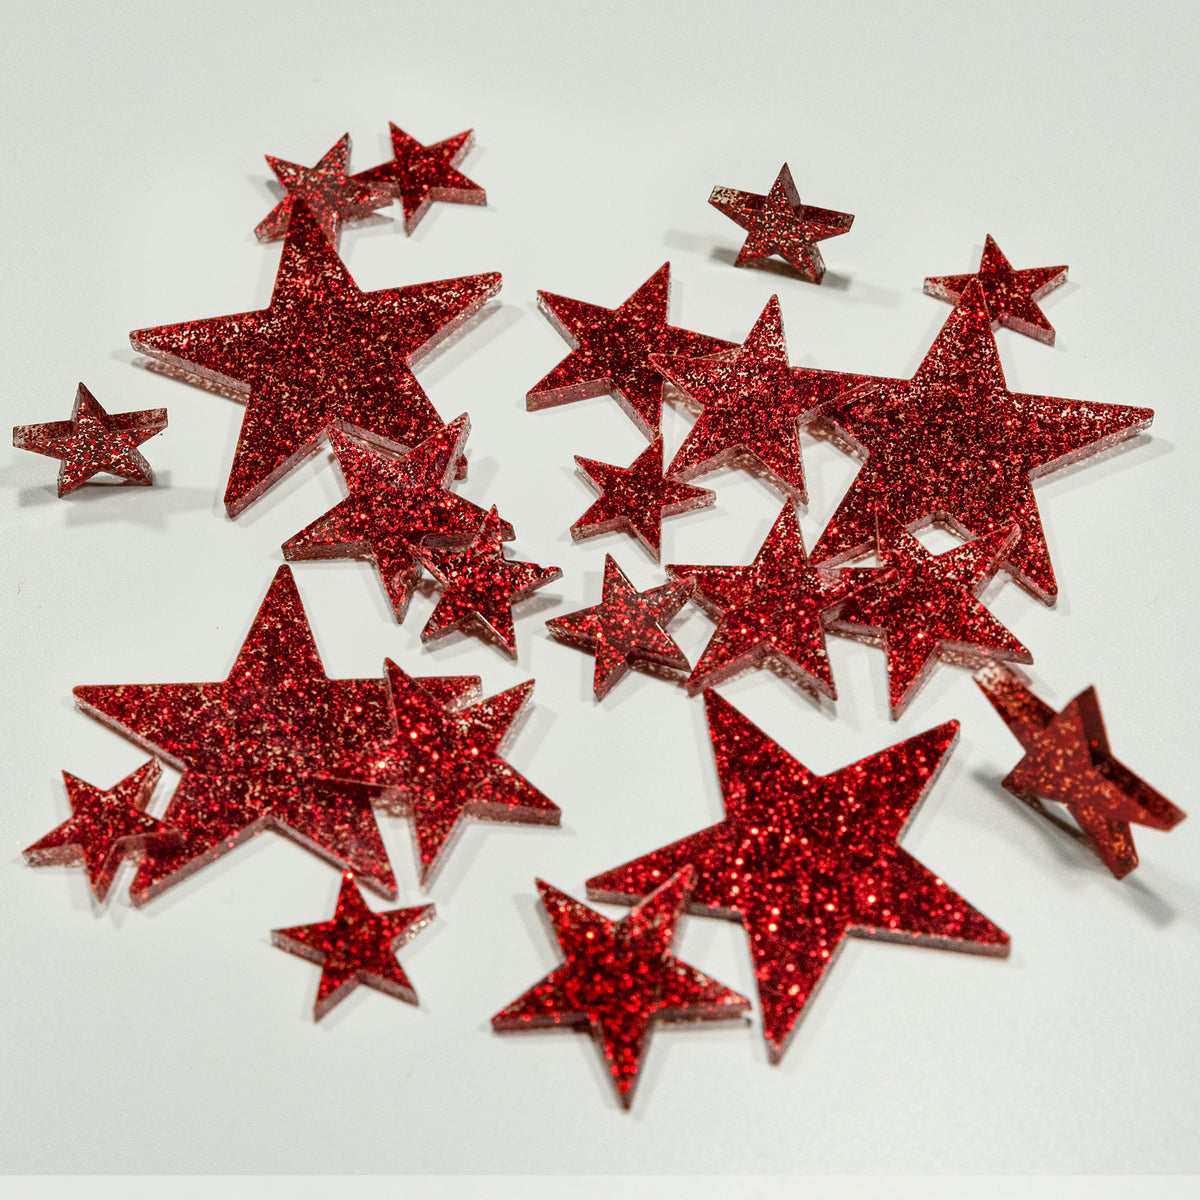 "Floating" Red Glitter Stars with Option of Submersible Fairy Lights - Vase Decorations - Table Scatter